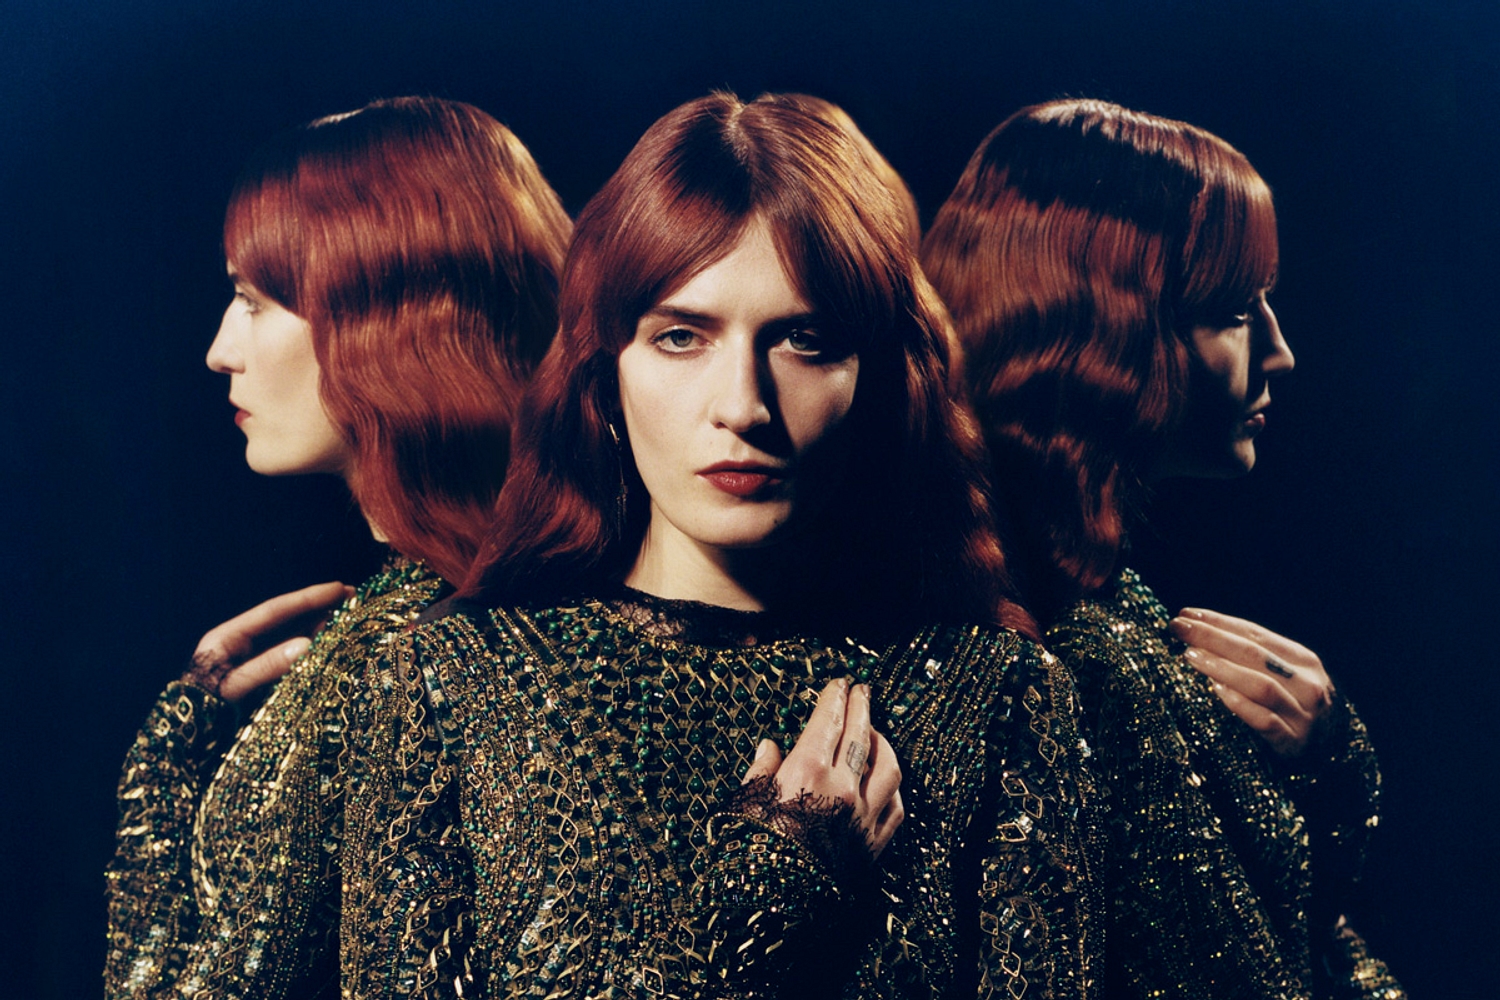 Florence and the Machine & Disclosure for this year’s Roskilde Festival